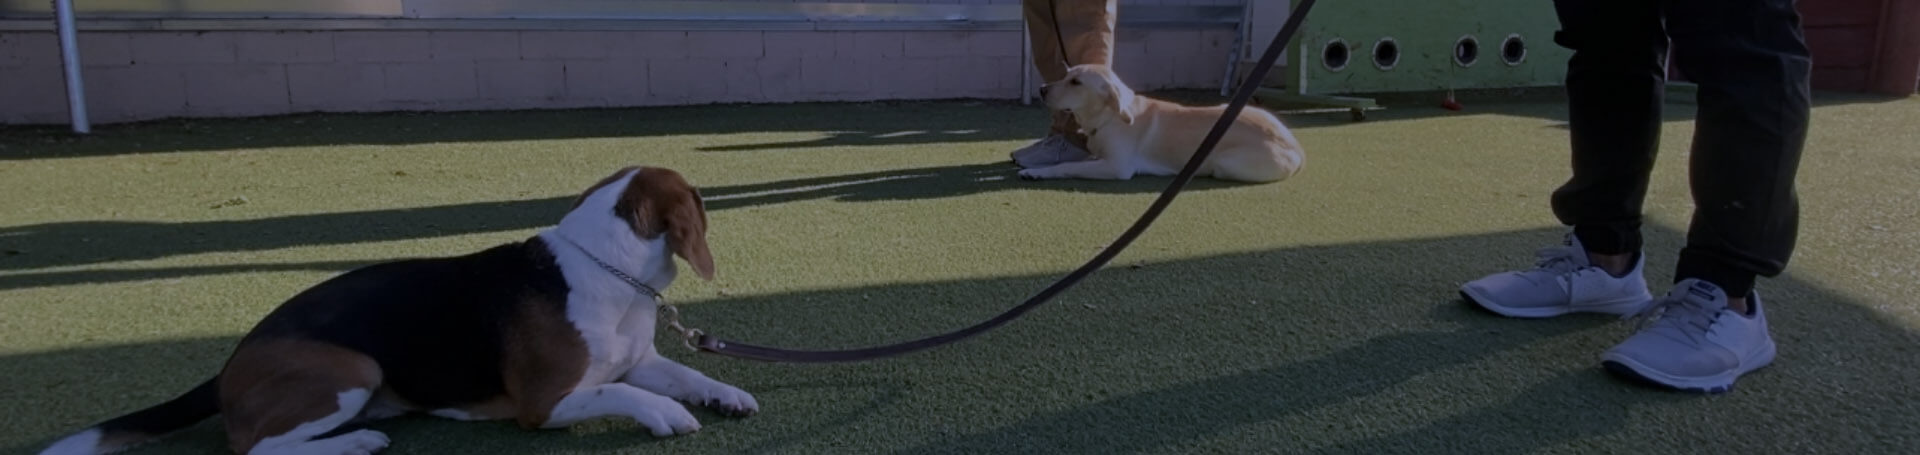 a dog sitting on the ground next to a person on a leash.